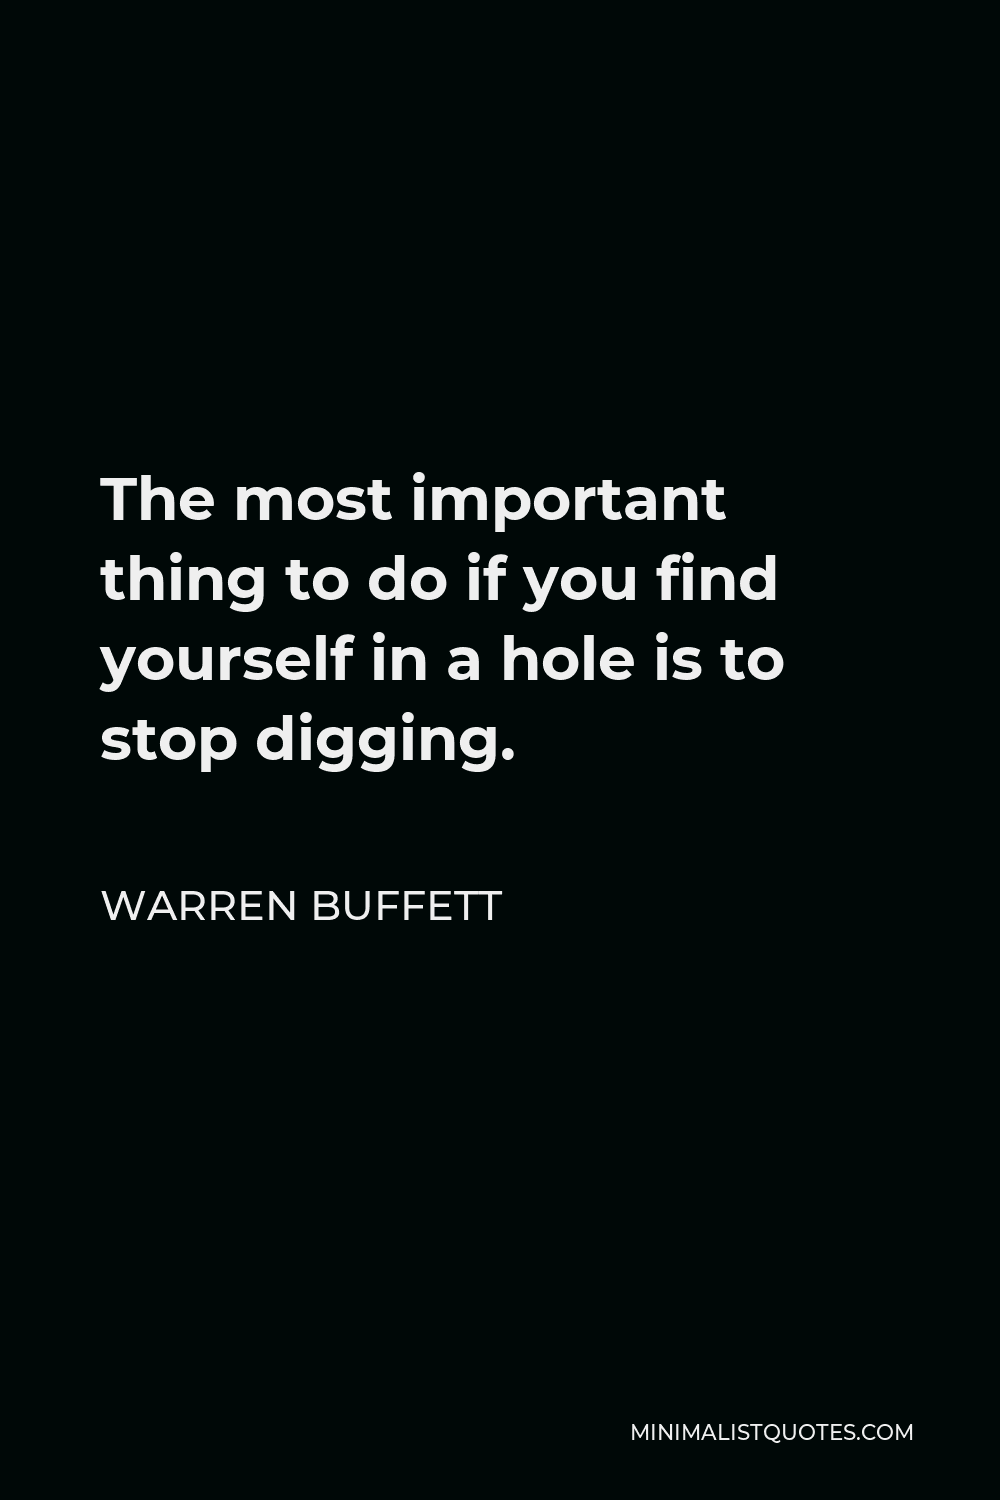 Warren Buffett Quote The Most Important Thing To Do If You Find